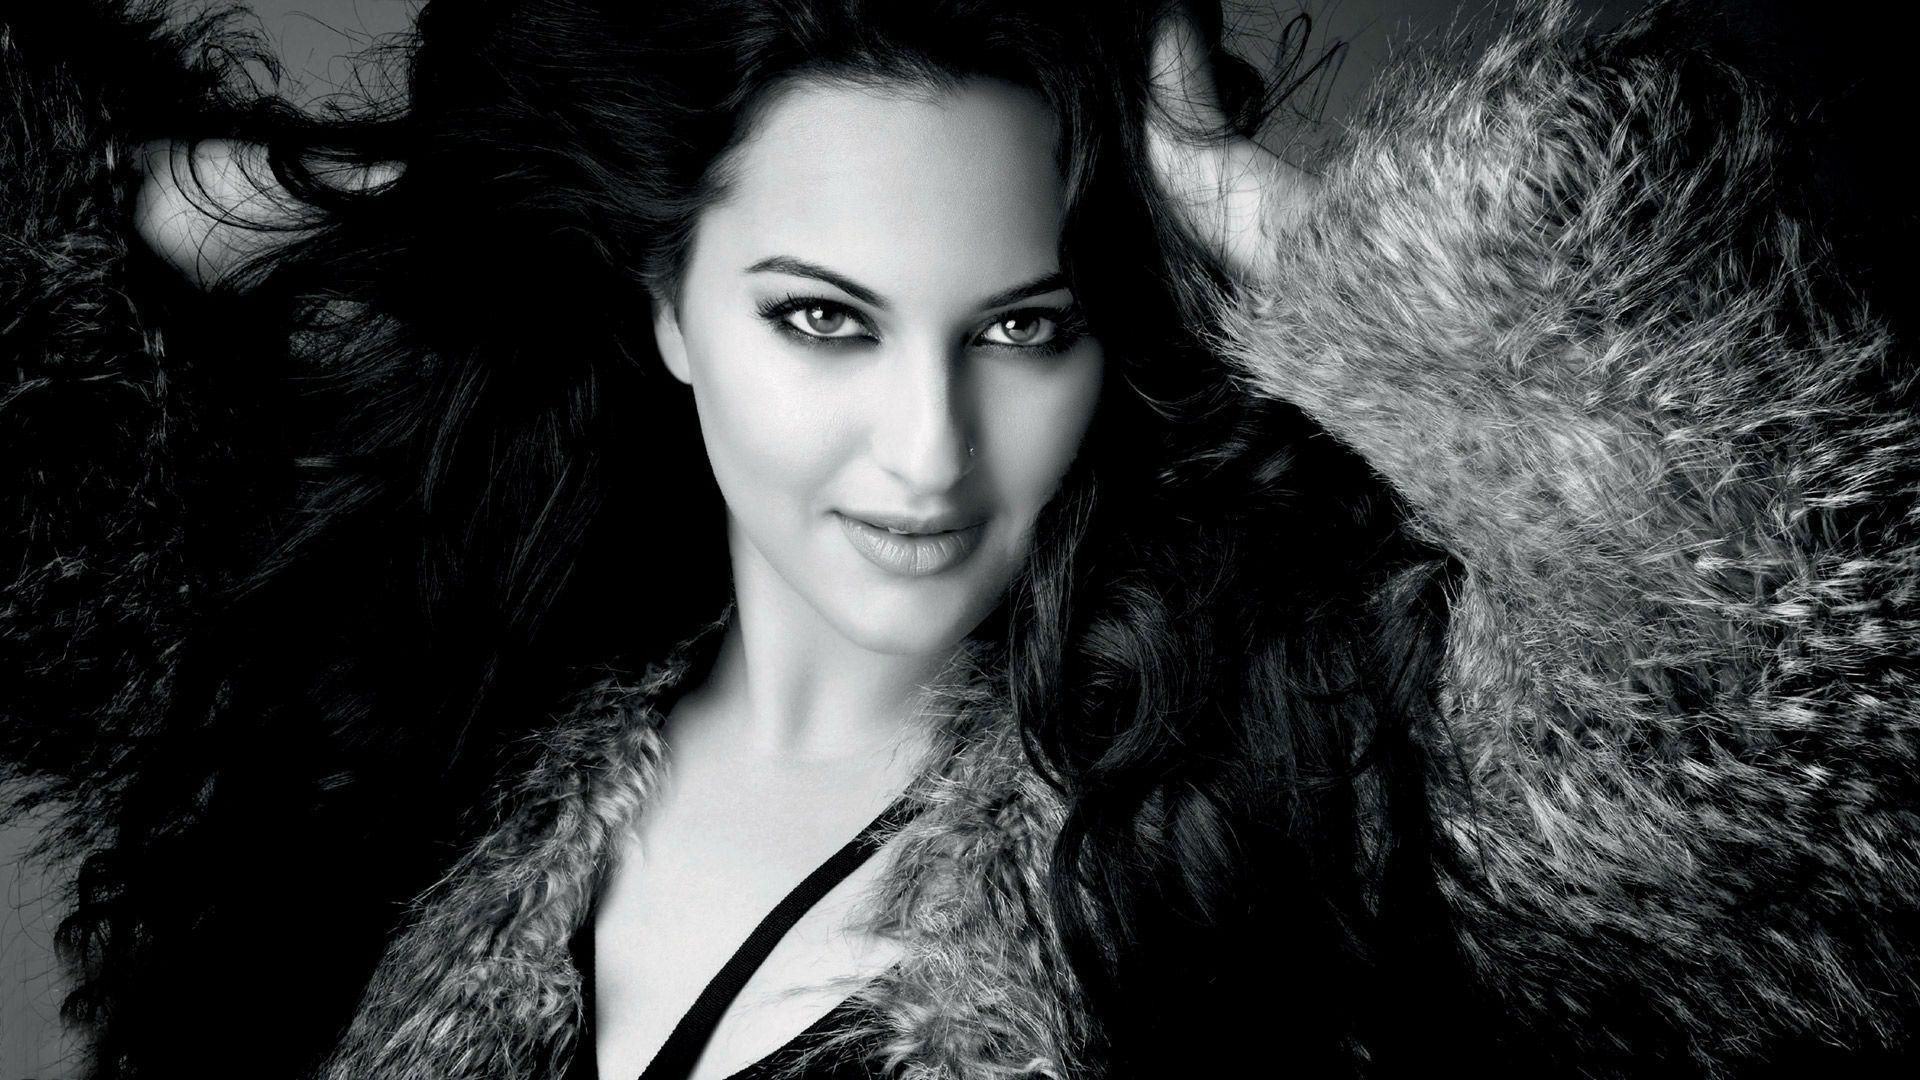 Sonakshi Sinha Wallpaper High Resolution and Quality Download